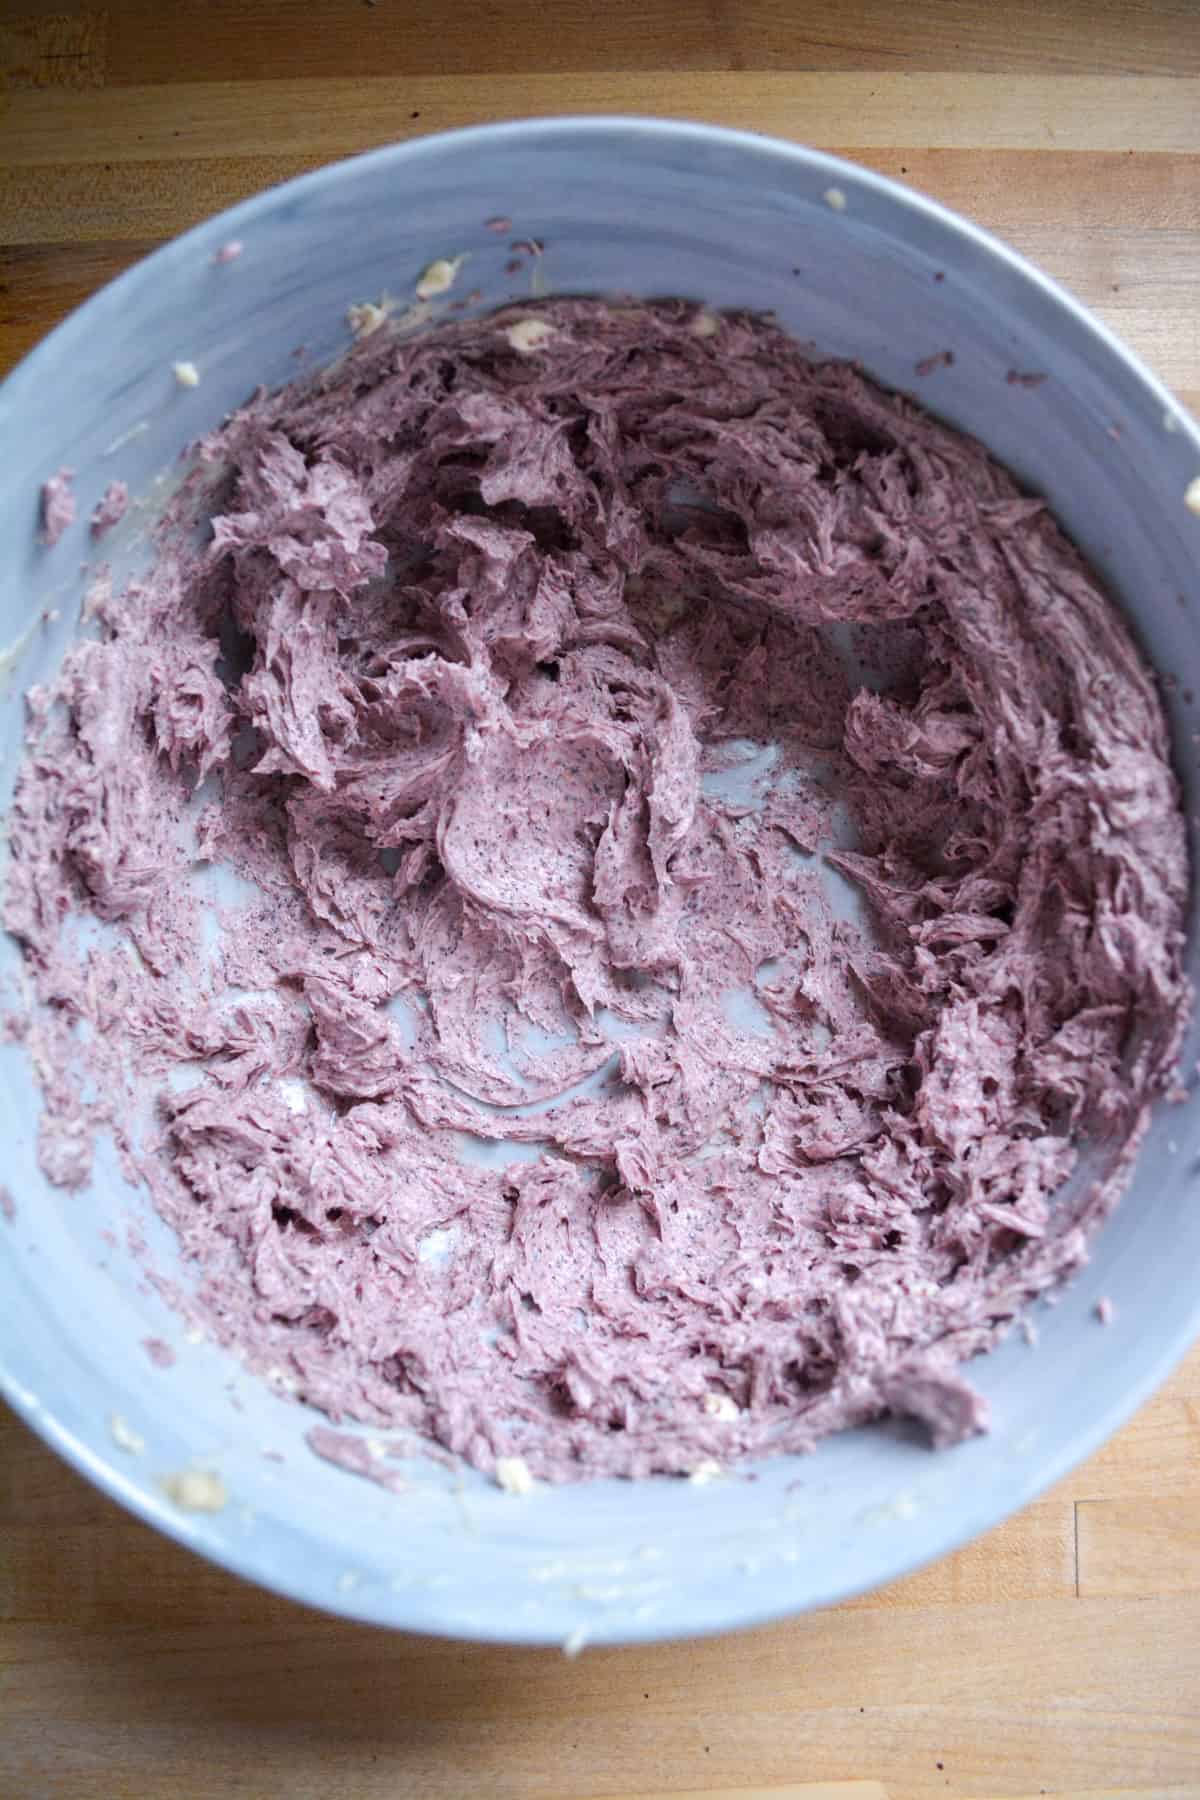 Blueberries mixed into the butter in a large mixing bowl.